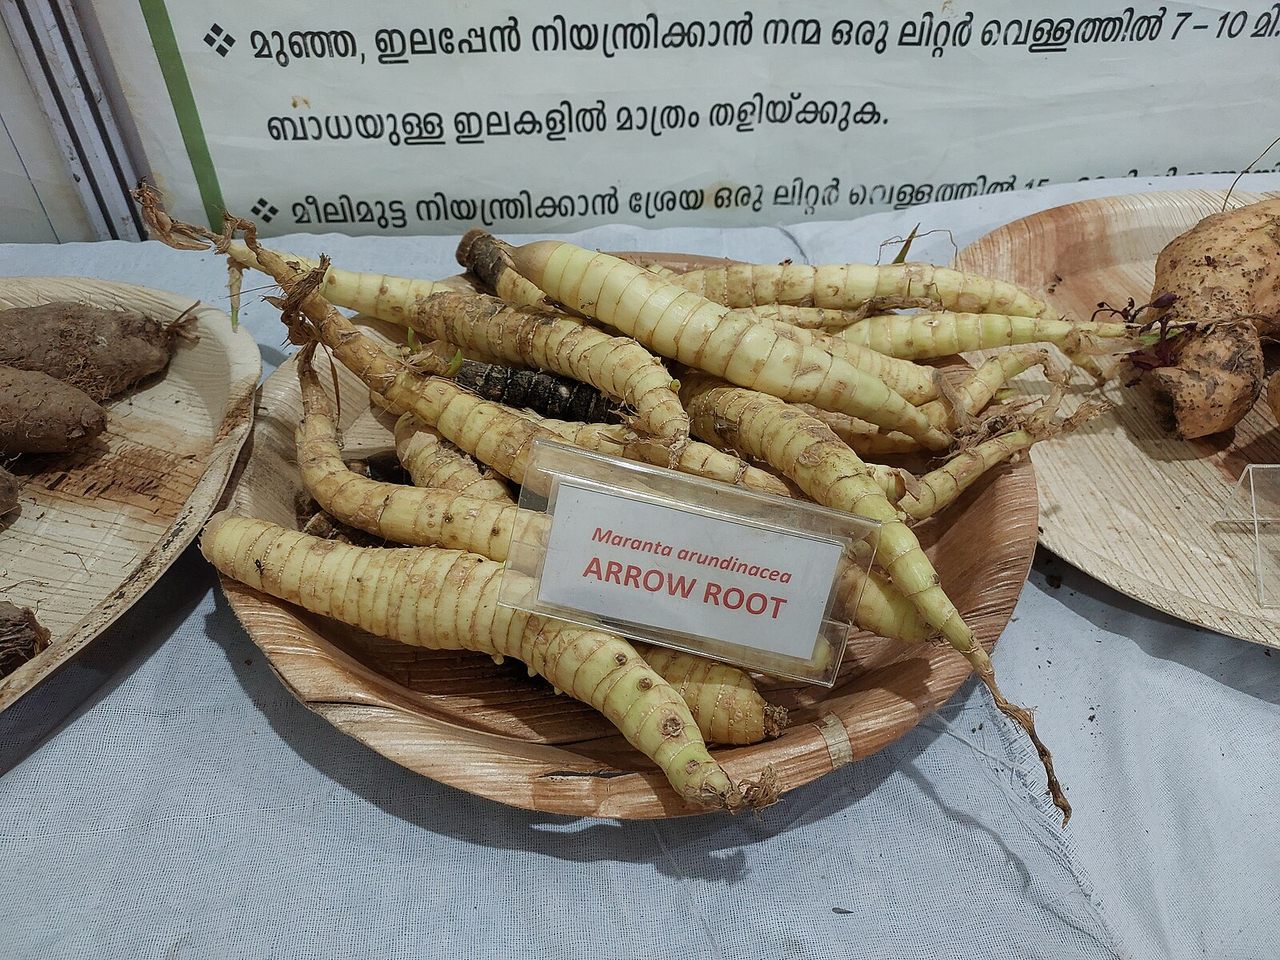 Though the original arrowroot is native to the tropical Americas, these were cultivated in India.